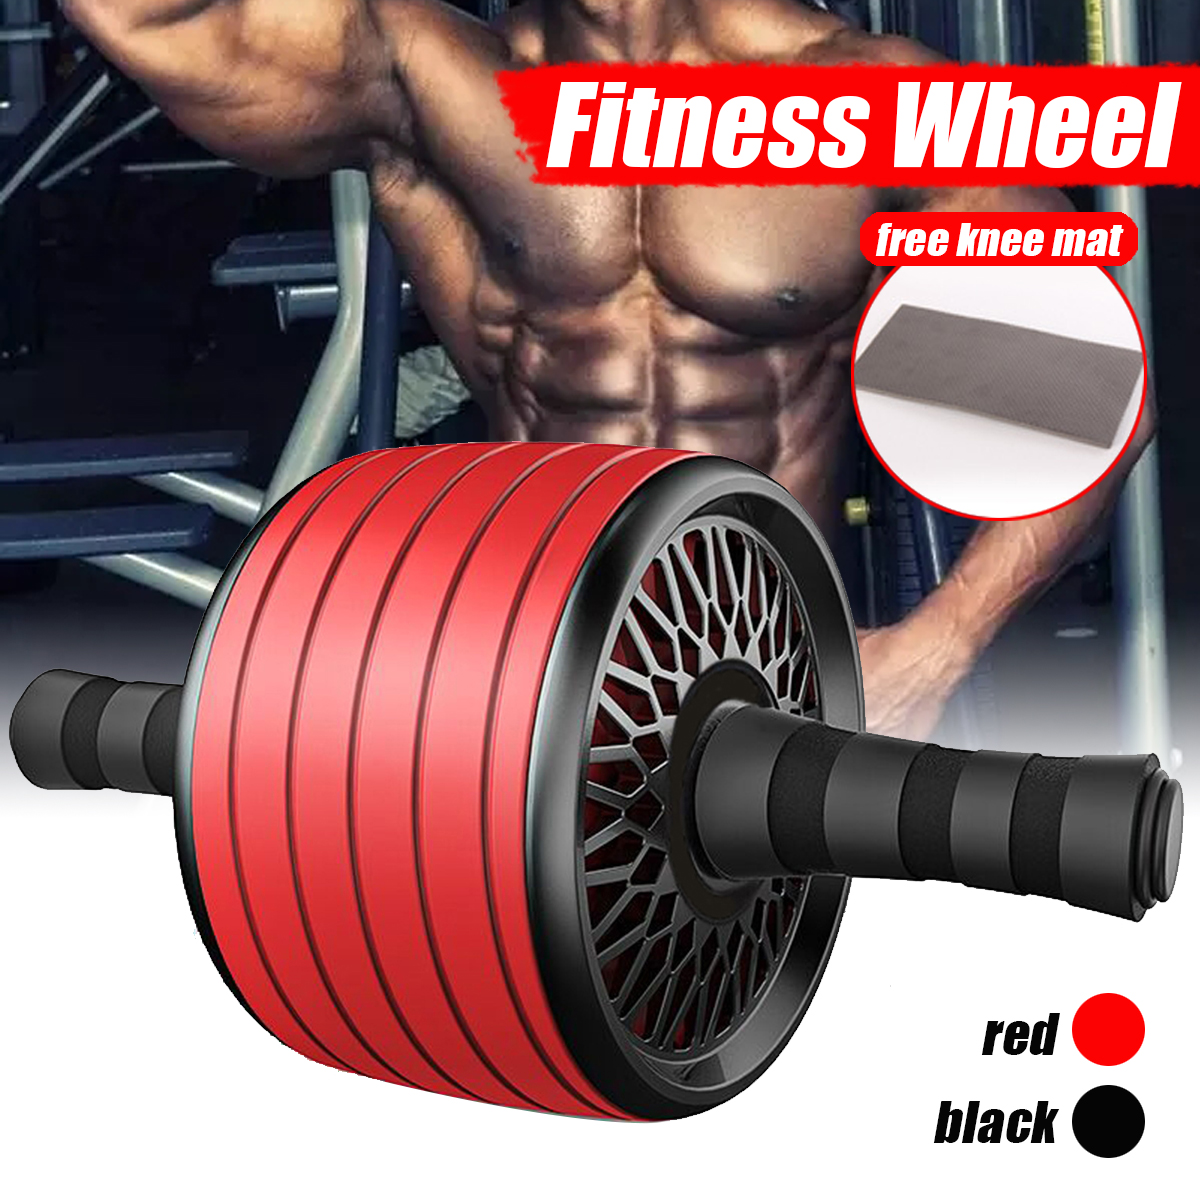 Silent-TPR-Ab-Roller-Fitness-Gym-Abdominal-Wheel-Roller-Sport-Core-Muscle-Training-Exercise-Tools-1678857-1